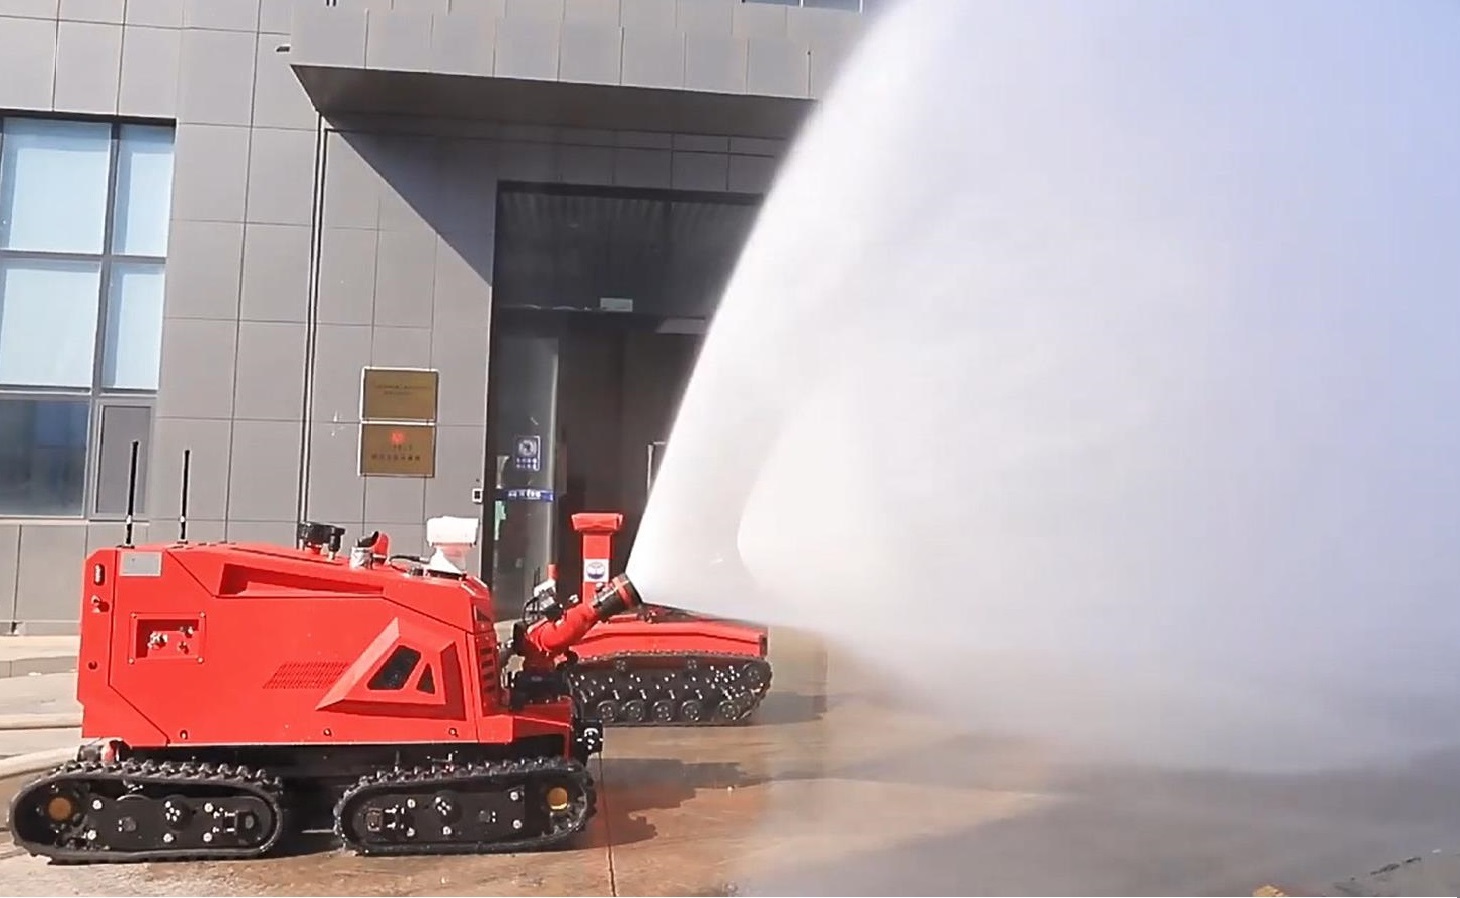 Fire Fighting Robot Water Cannon Security Patrol Robots Vehicle RXR-M150GD 